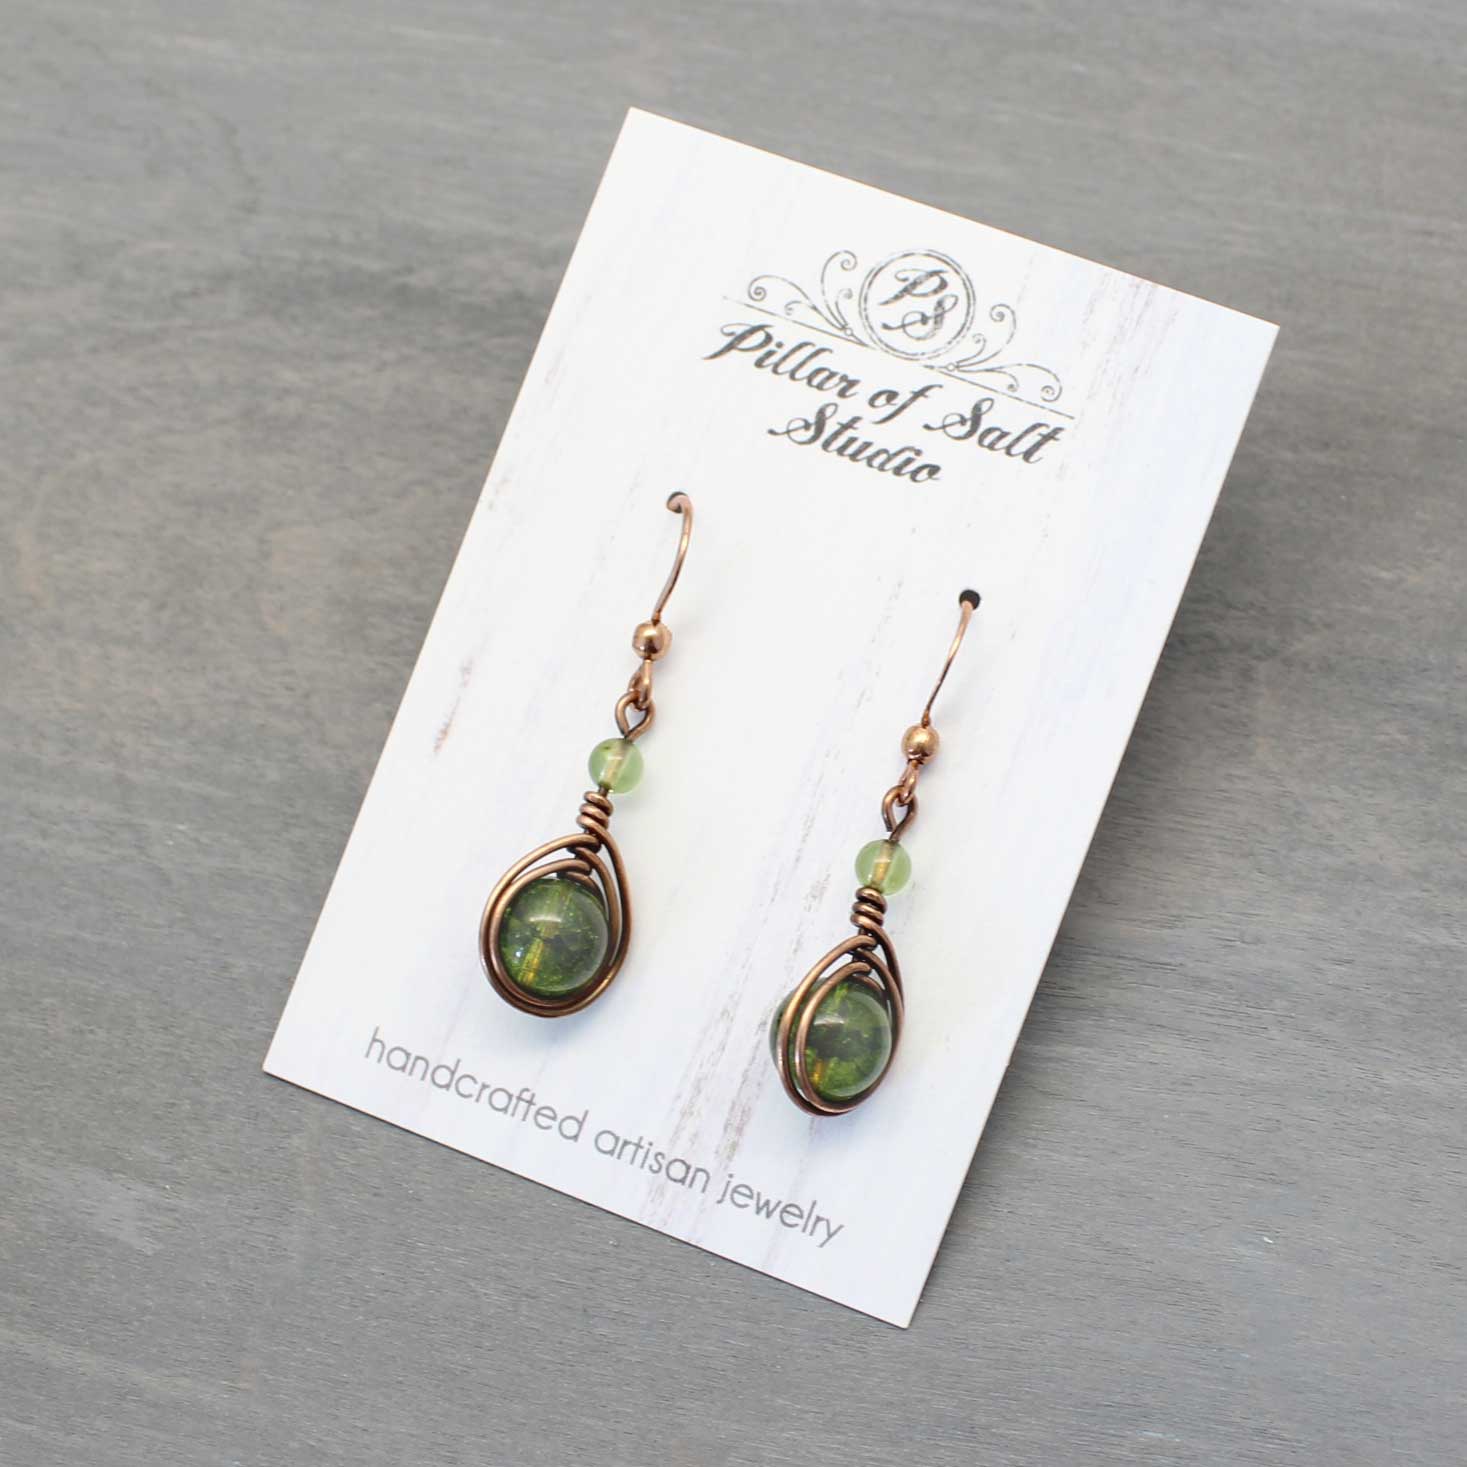 Peridot and copper wire wrapped earrings